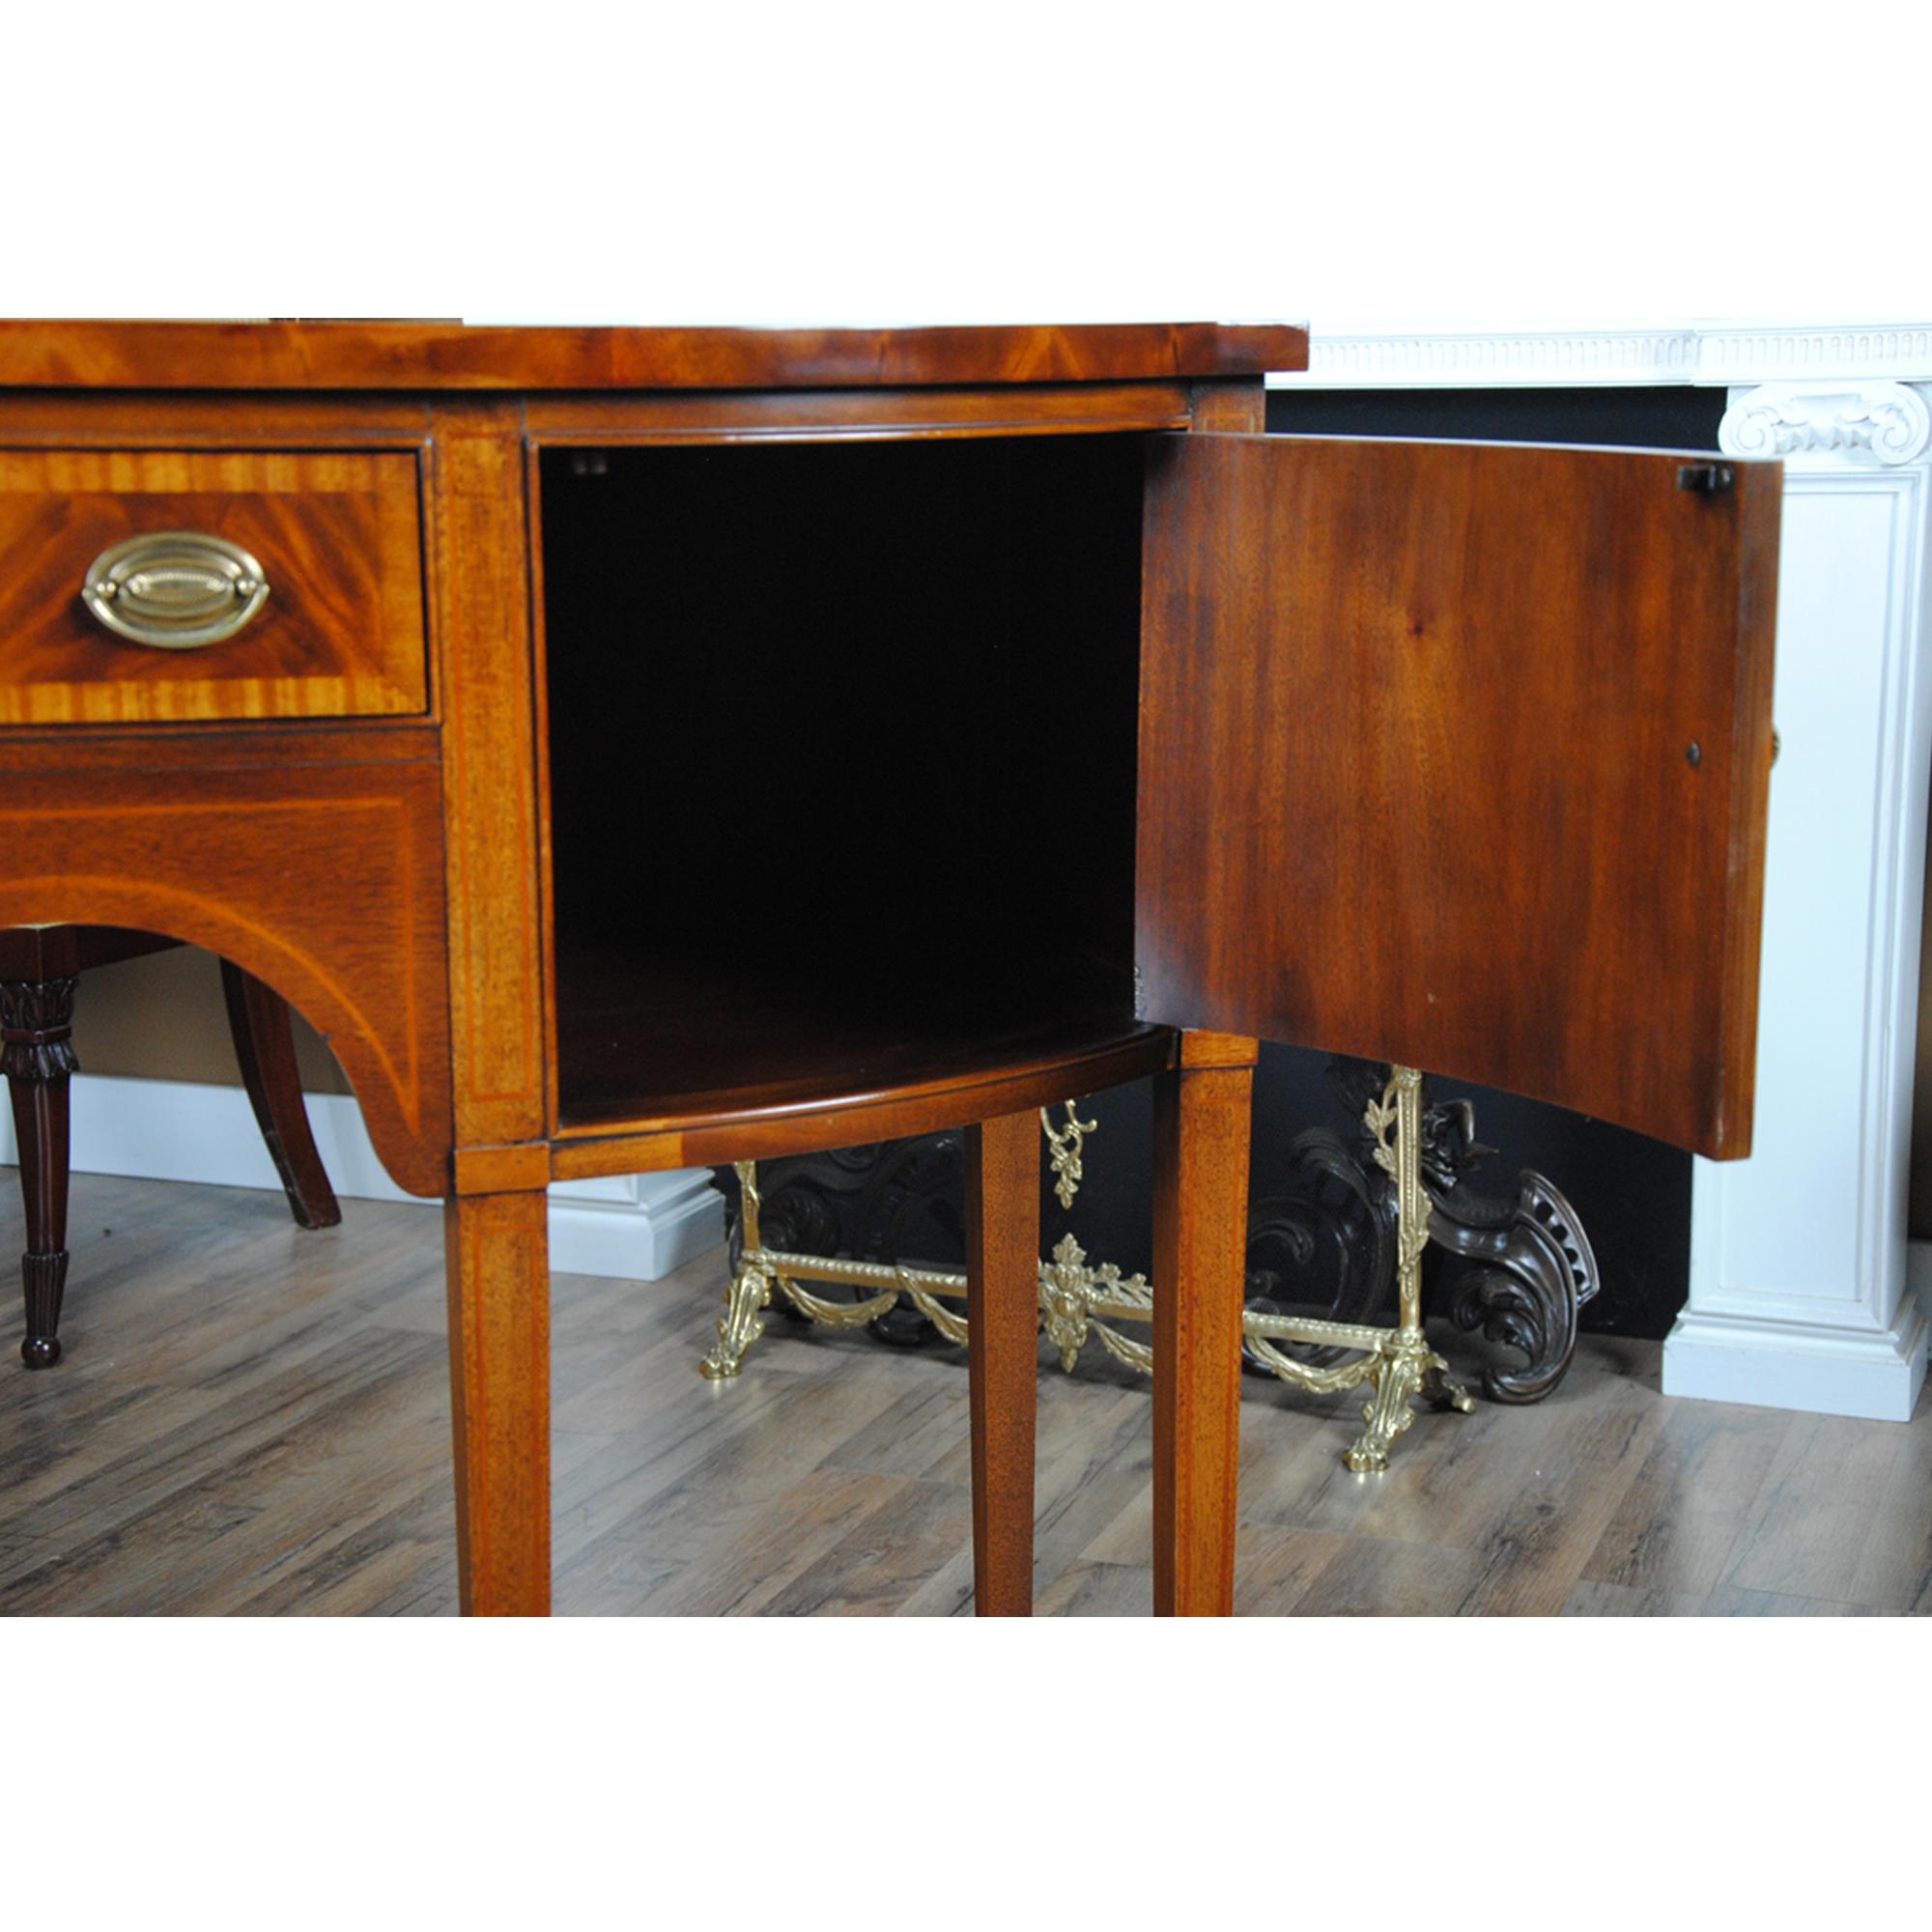 Vintage Drexel Mahogany Sideboard In Good Condition For Sale In Annville, PA